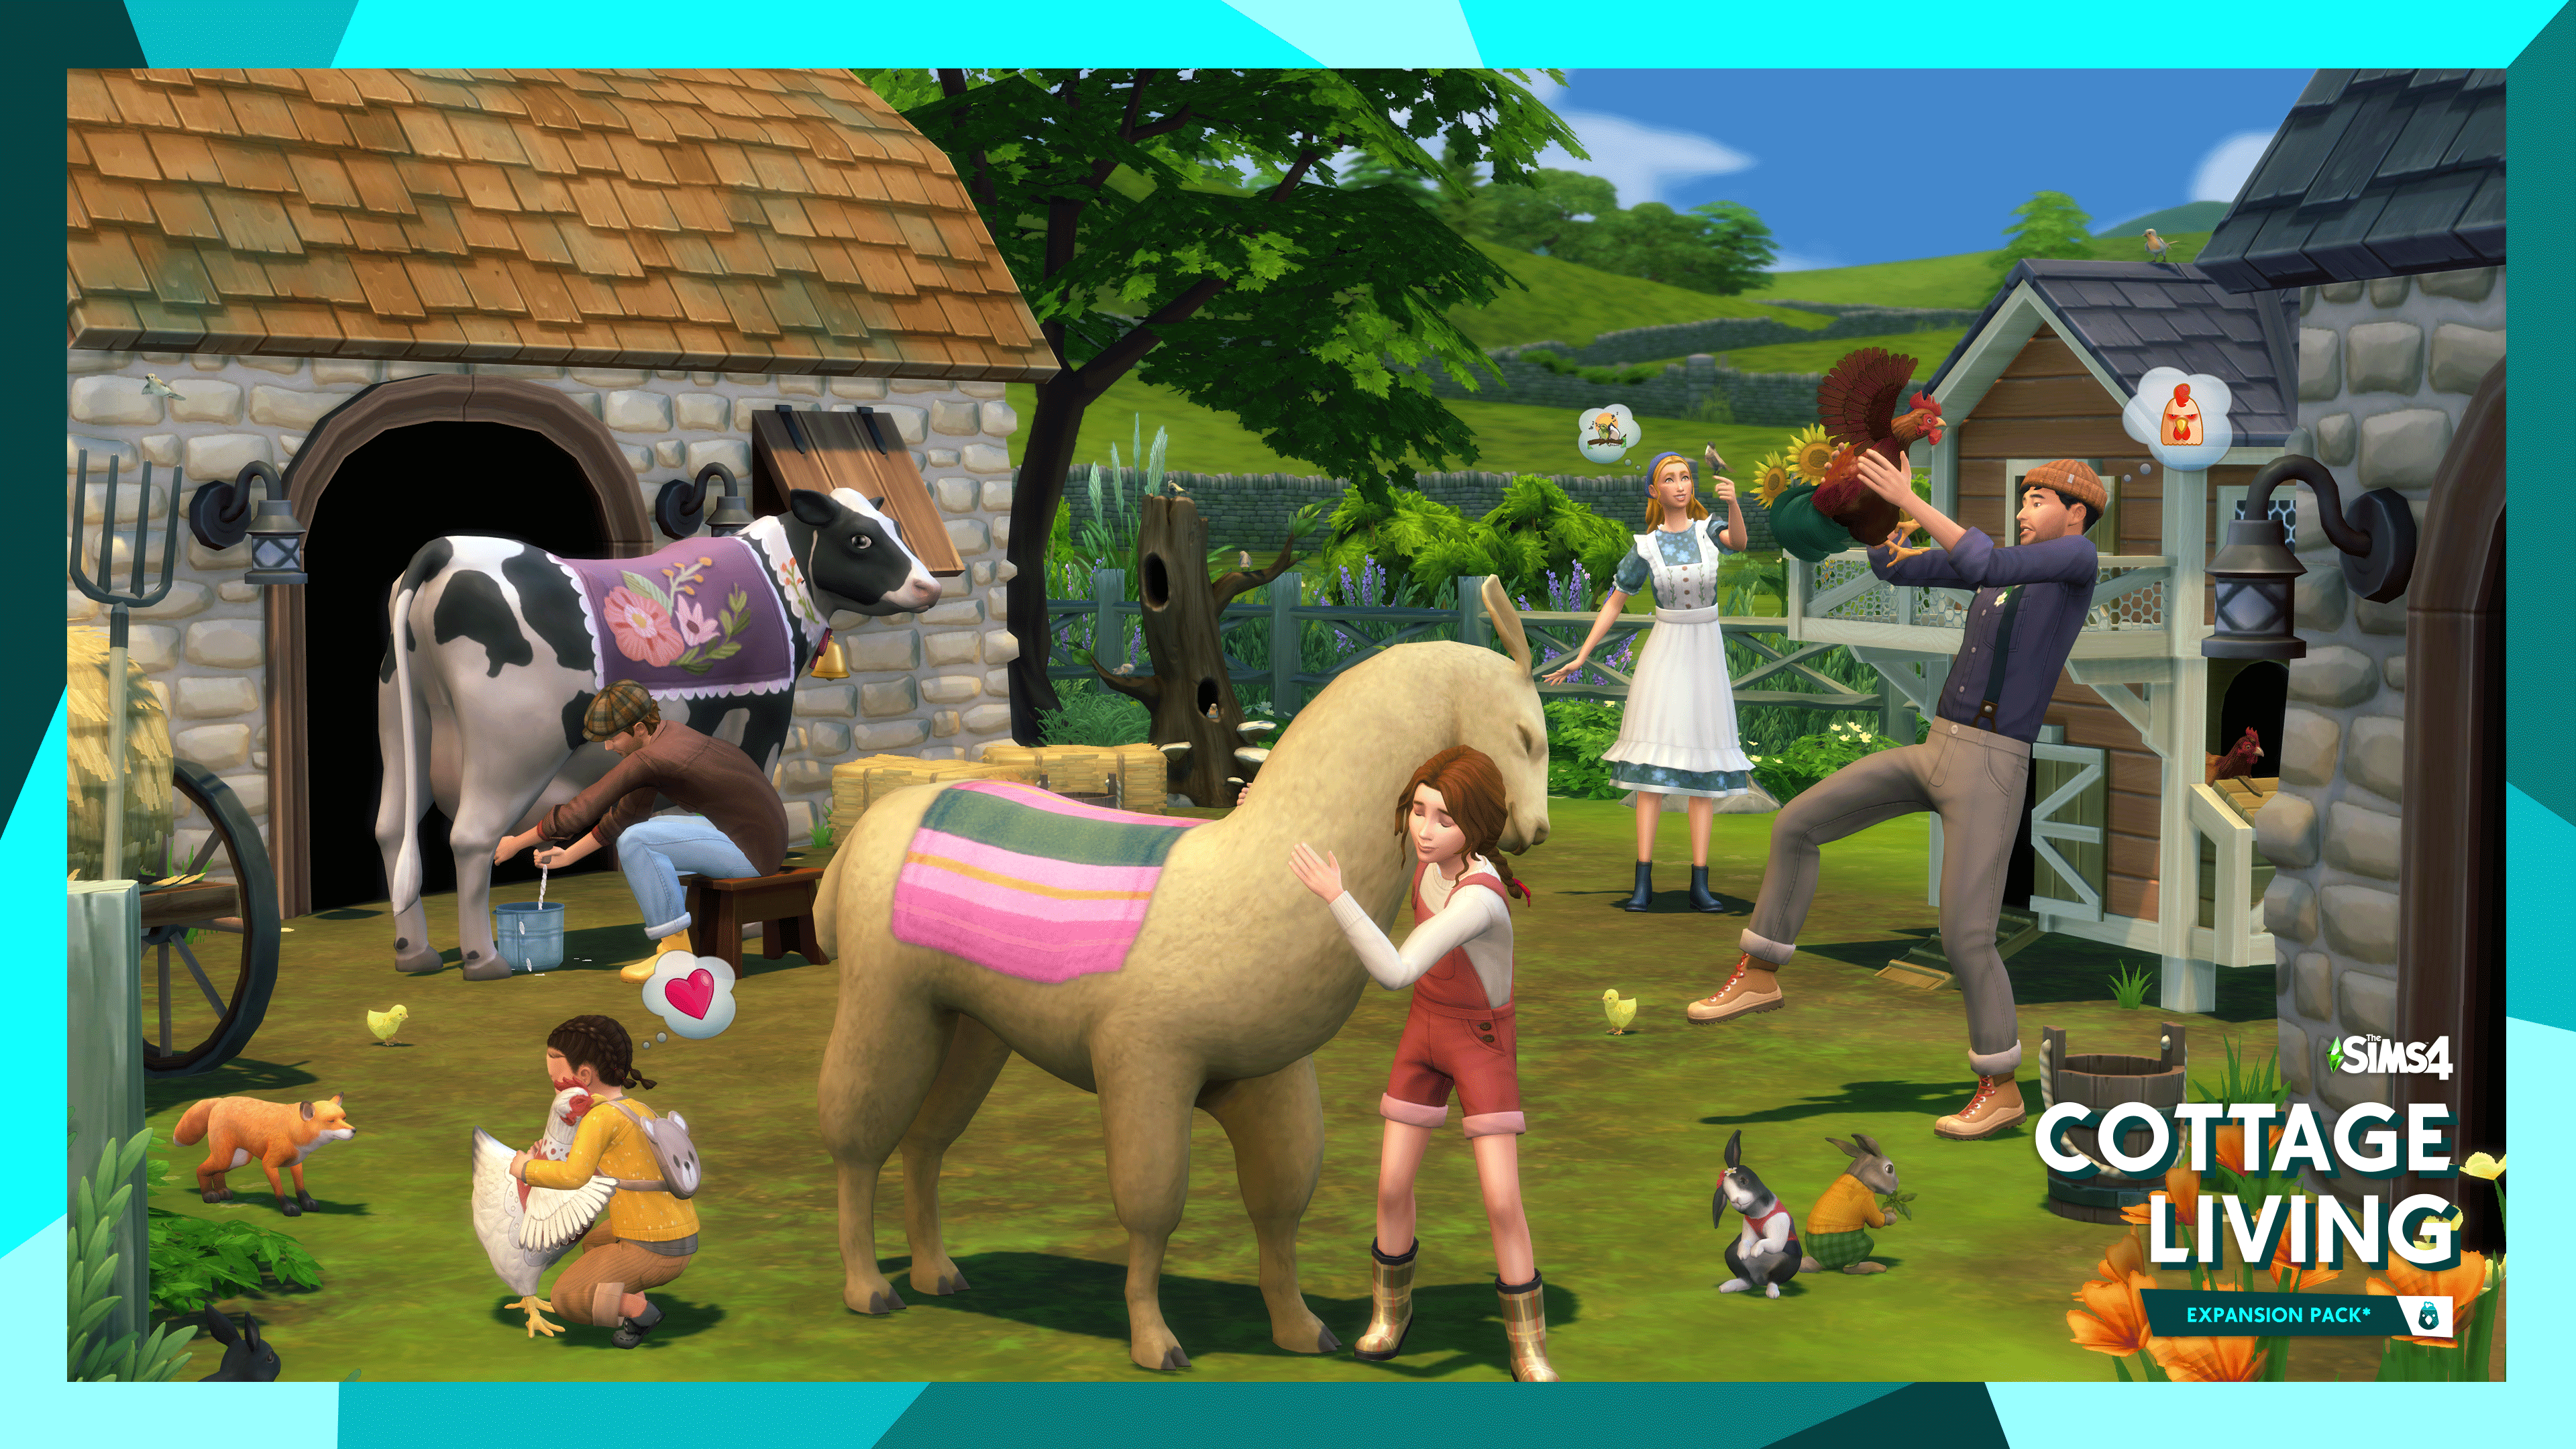 A sim in Cottage Living hugging a horse while other sims watch